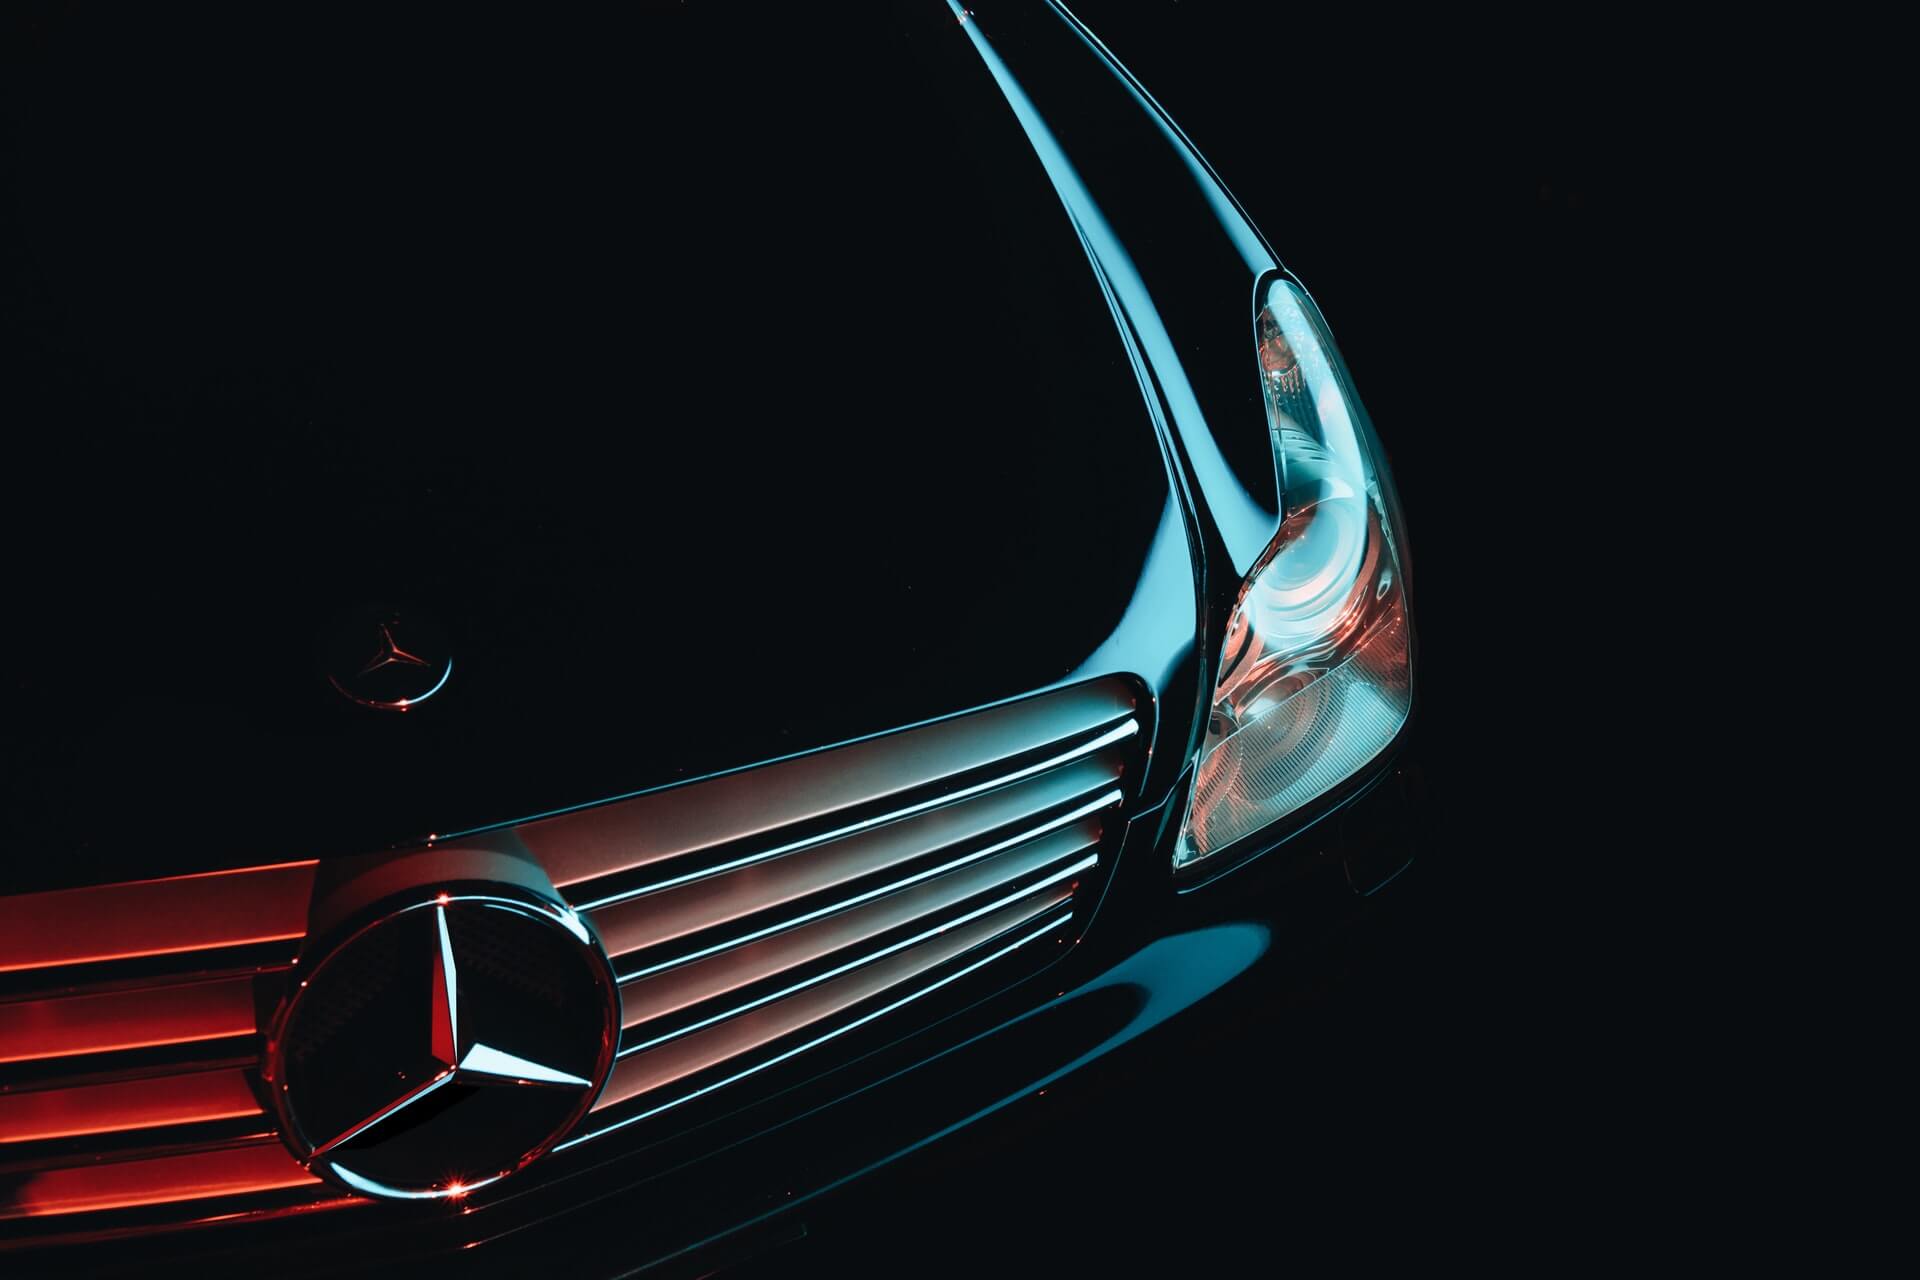 Security bugs were found in a Mercedes-Benz's vehicle. Source: Unsplash